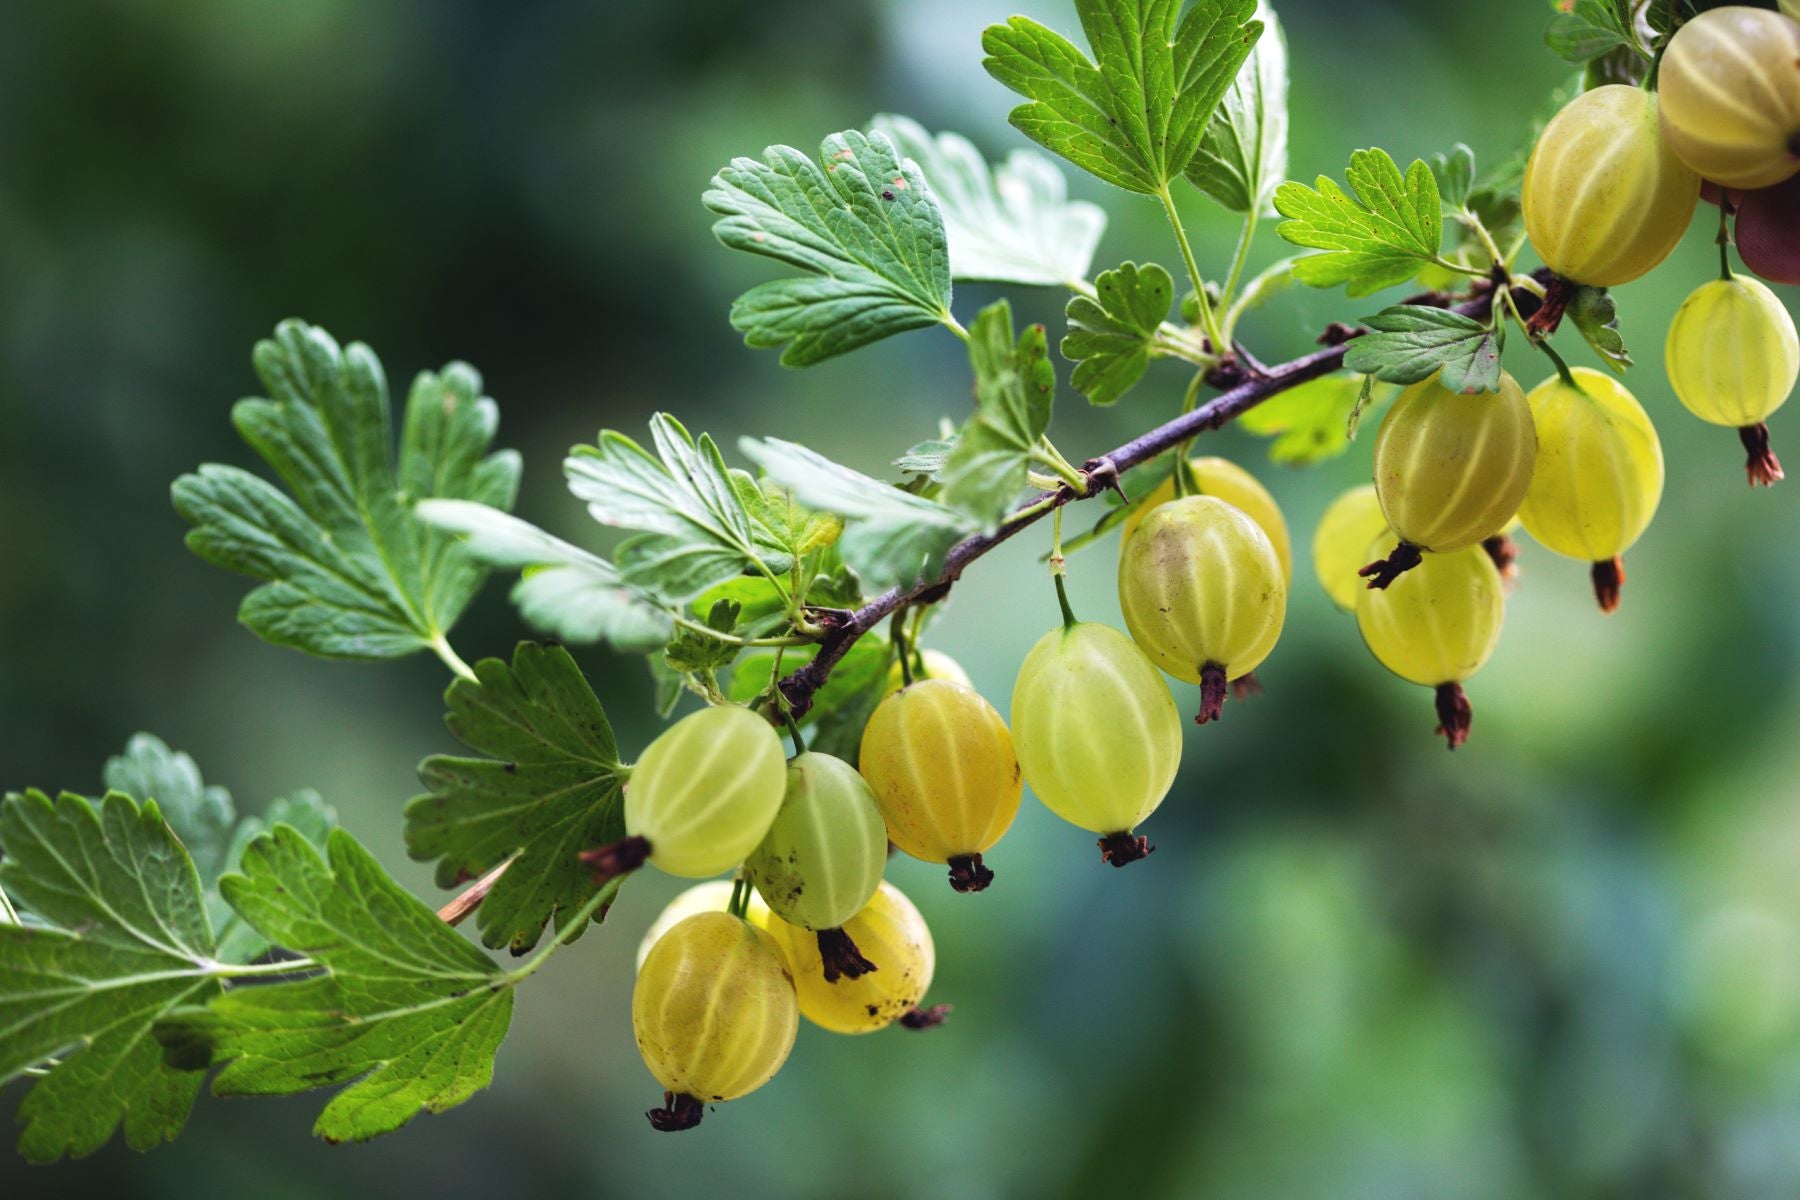 How To Grow and Look After Currant and Gooseberry Plants